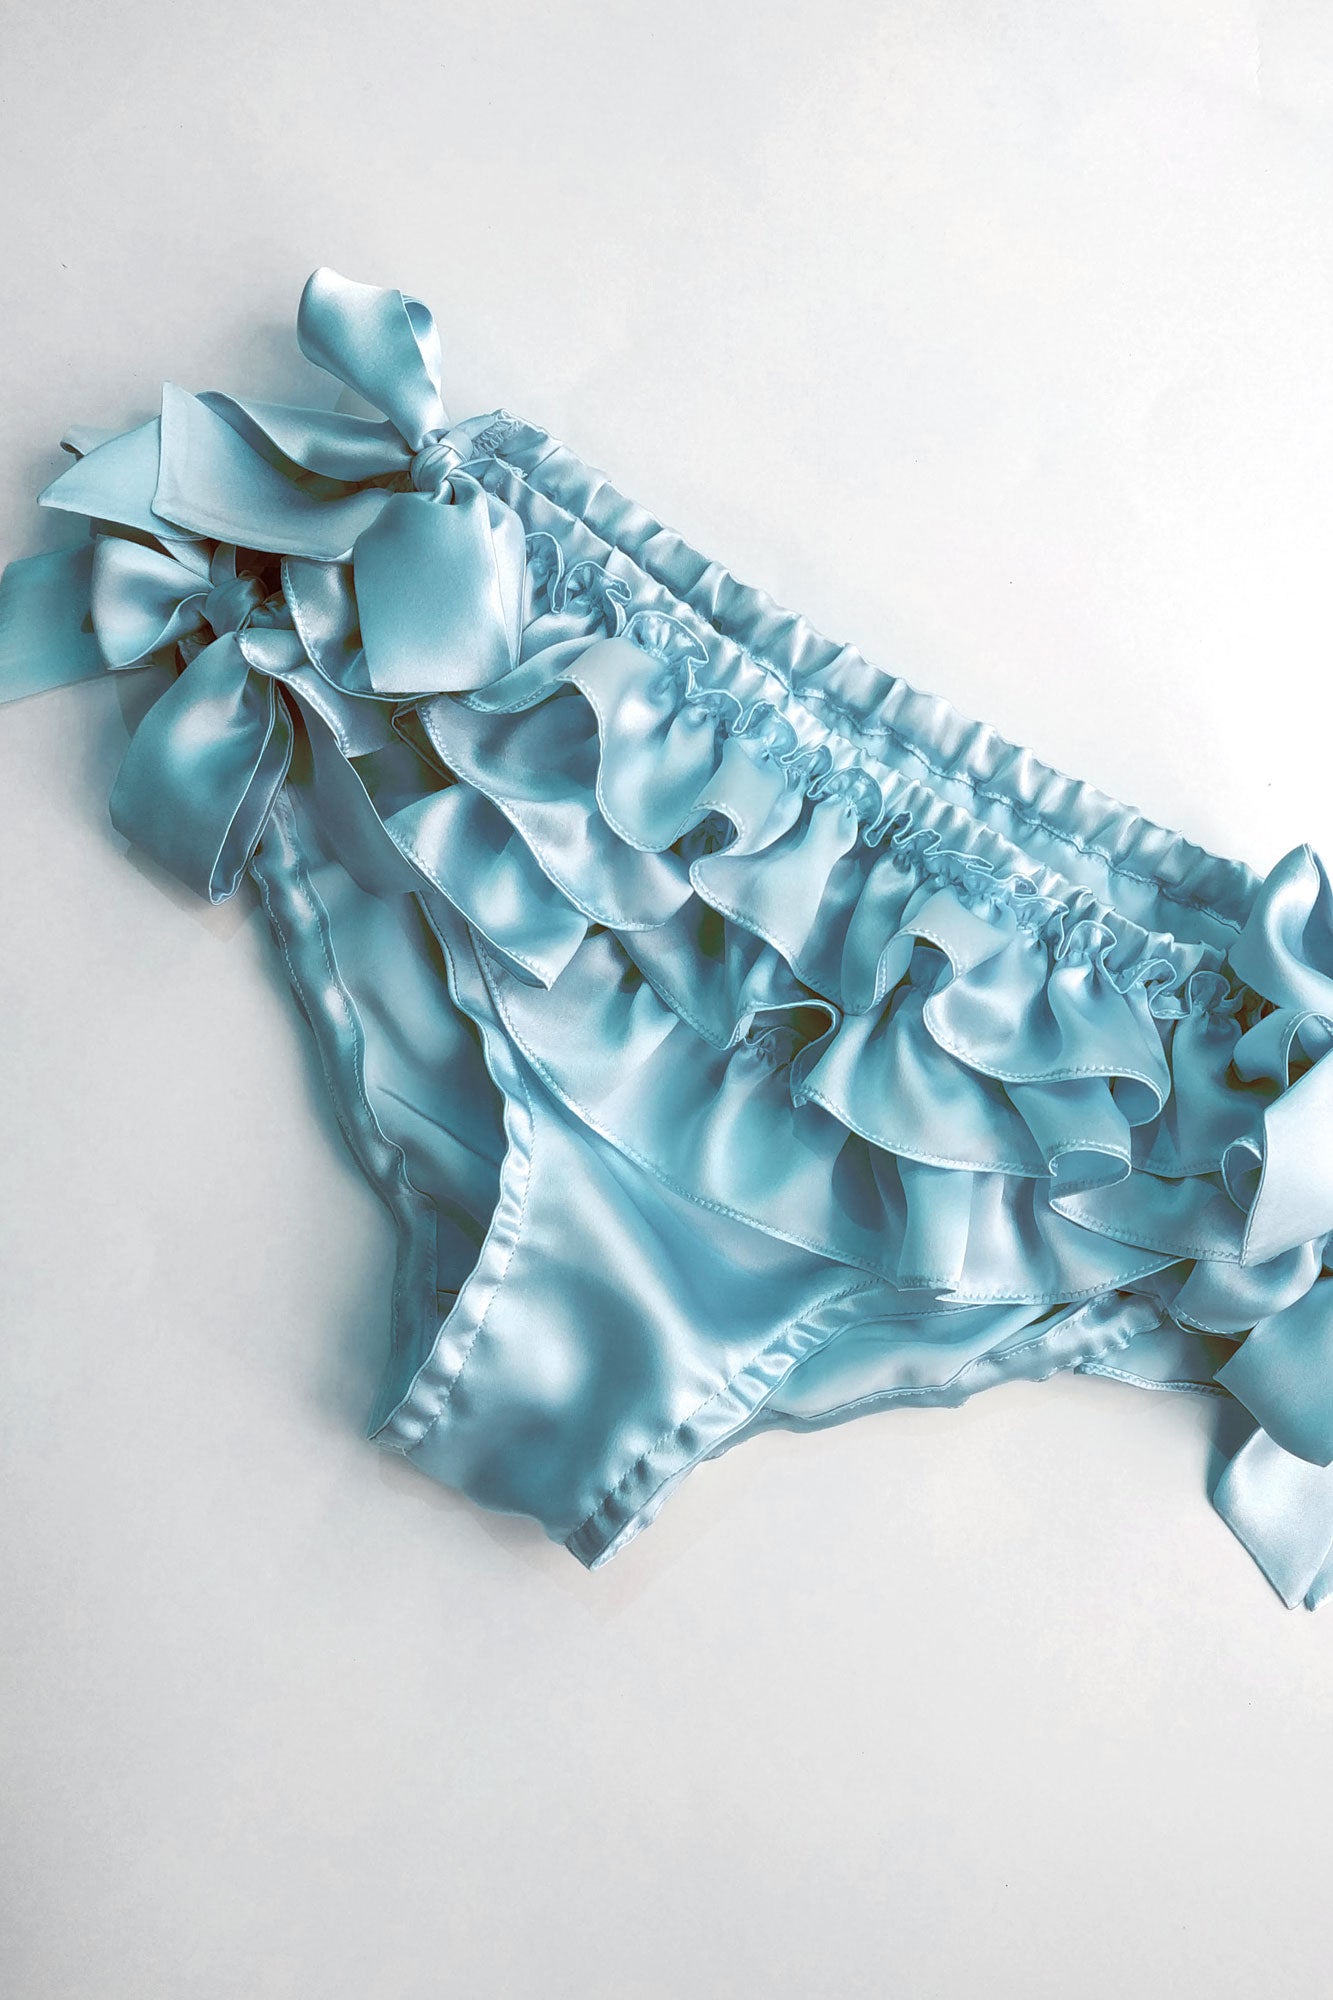 Blue Ruffled Plus Size Panties  Sexy Plus Size Frilly Knickers